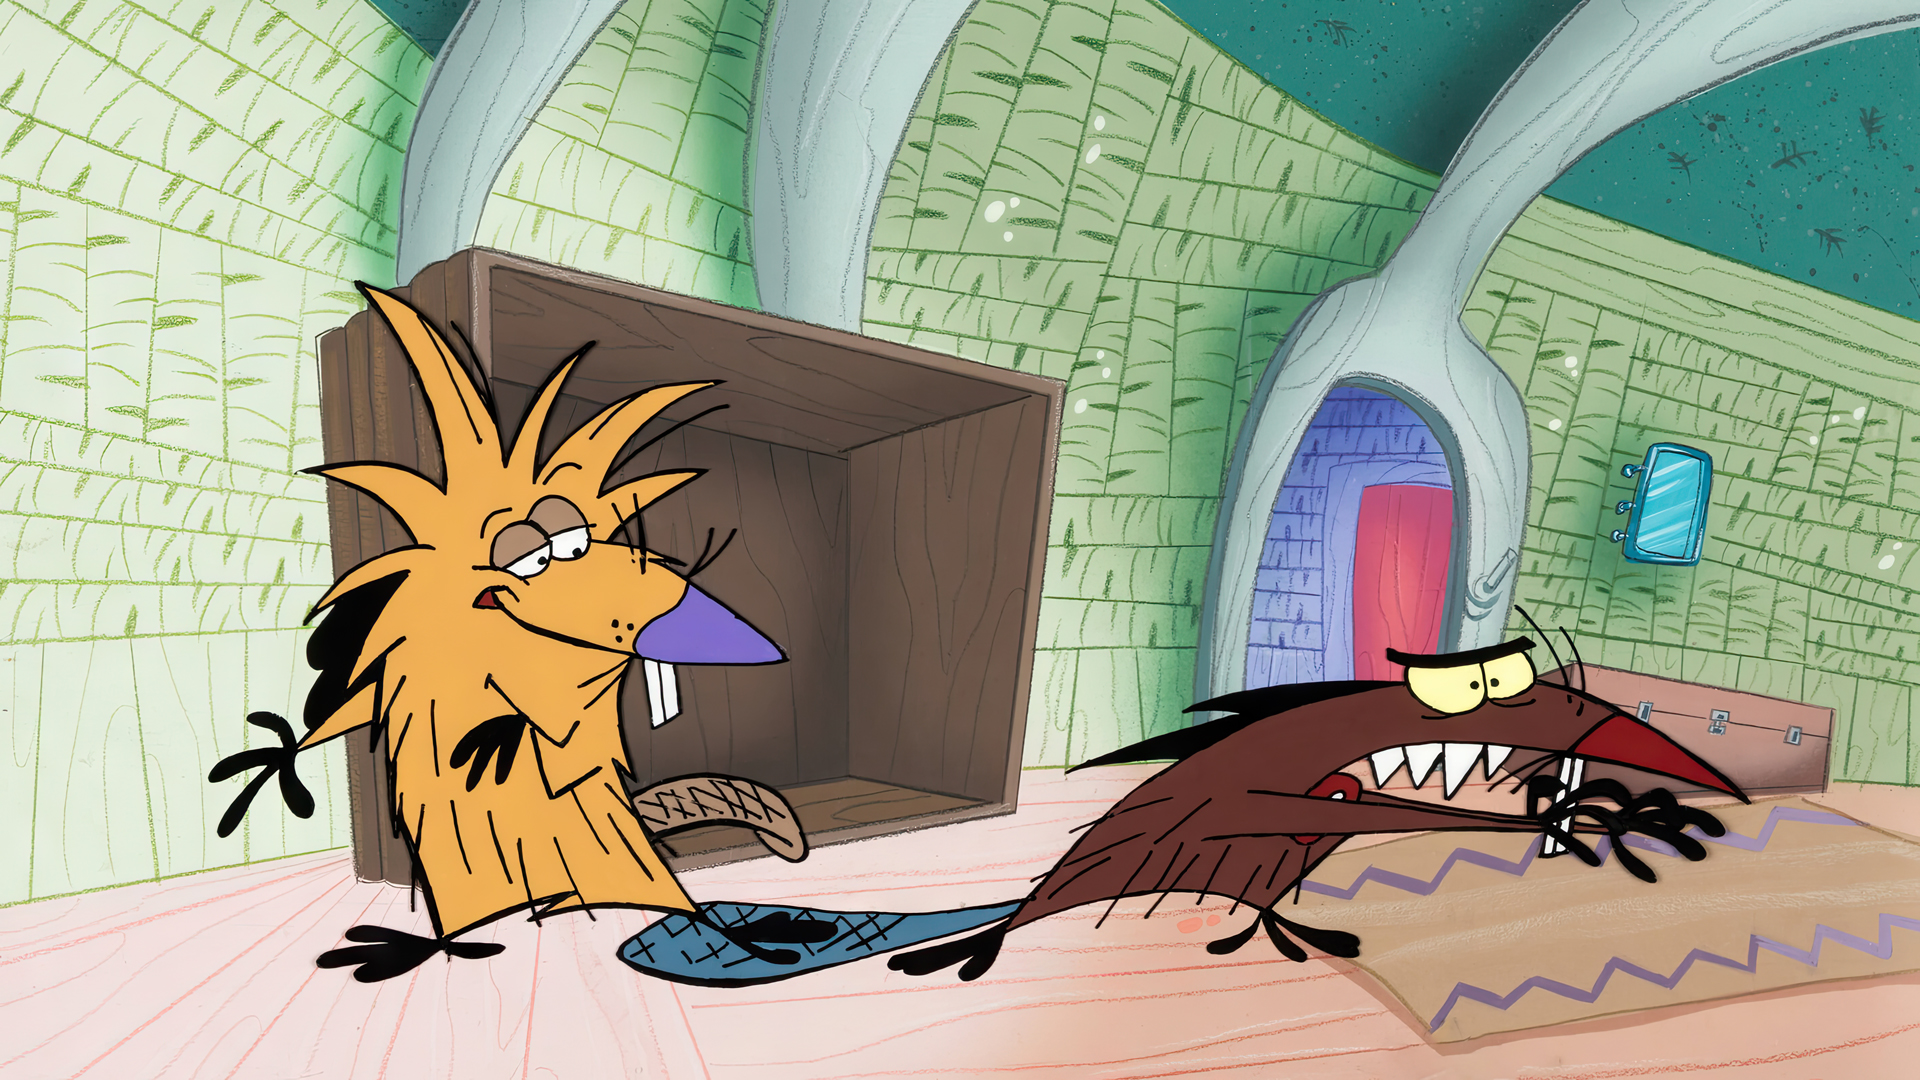 General 1920x1080 The Angry Beavers cartoon animation film stills production cel Nickelodeon animated series